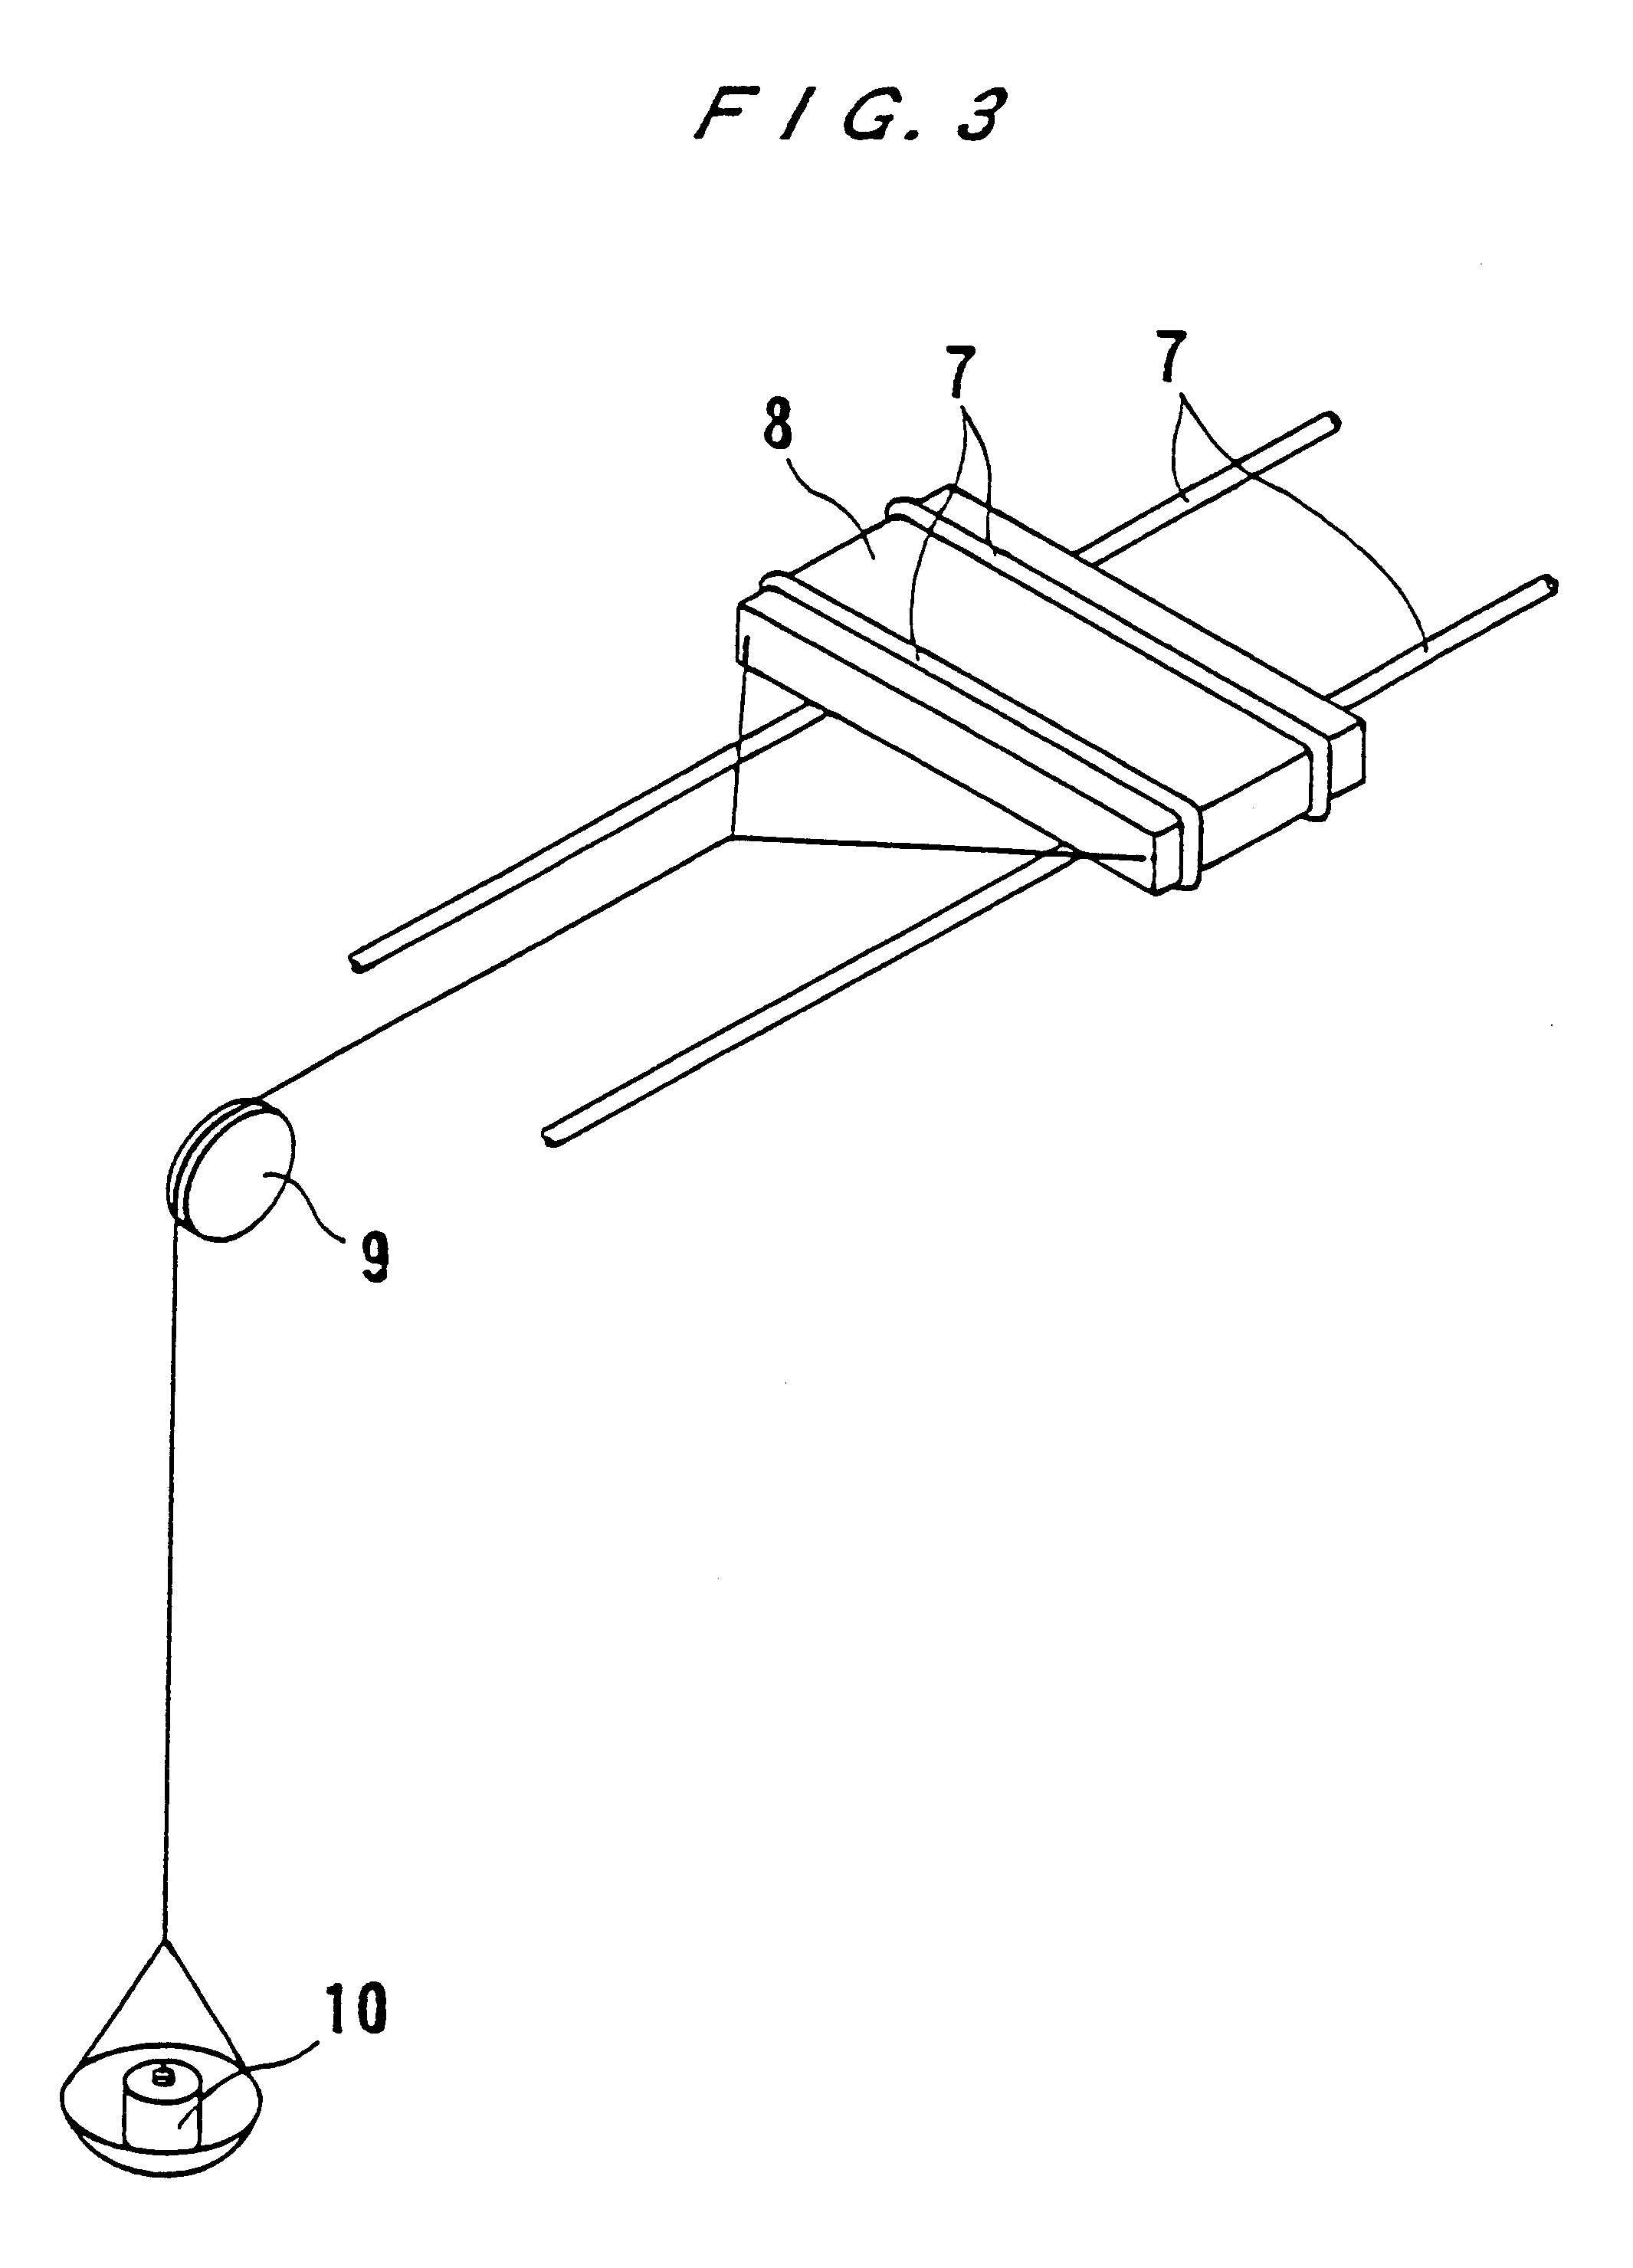 Multilayer insulated wire and transformers using the same